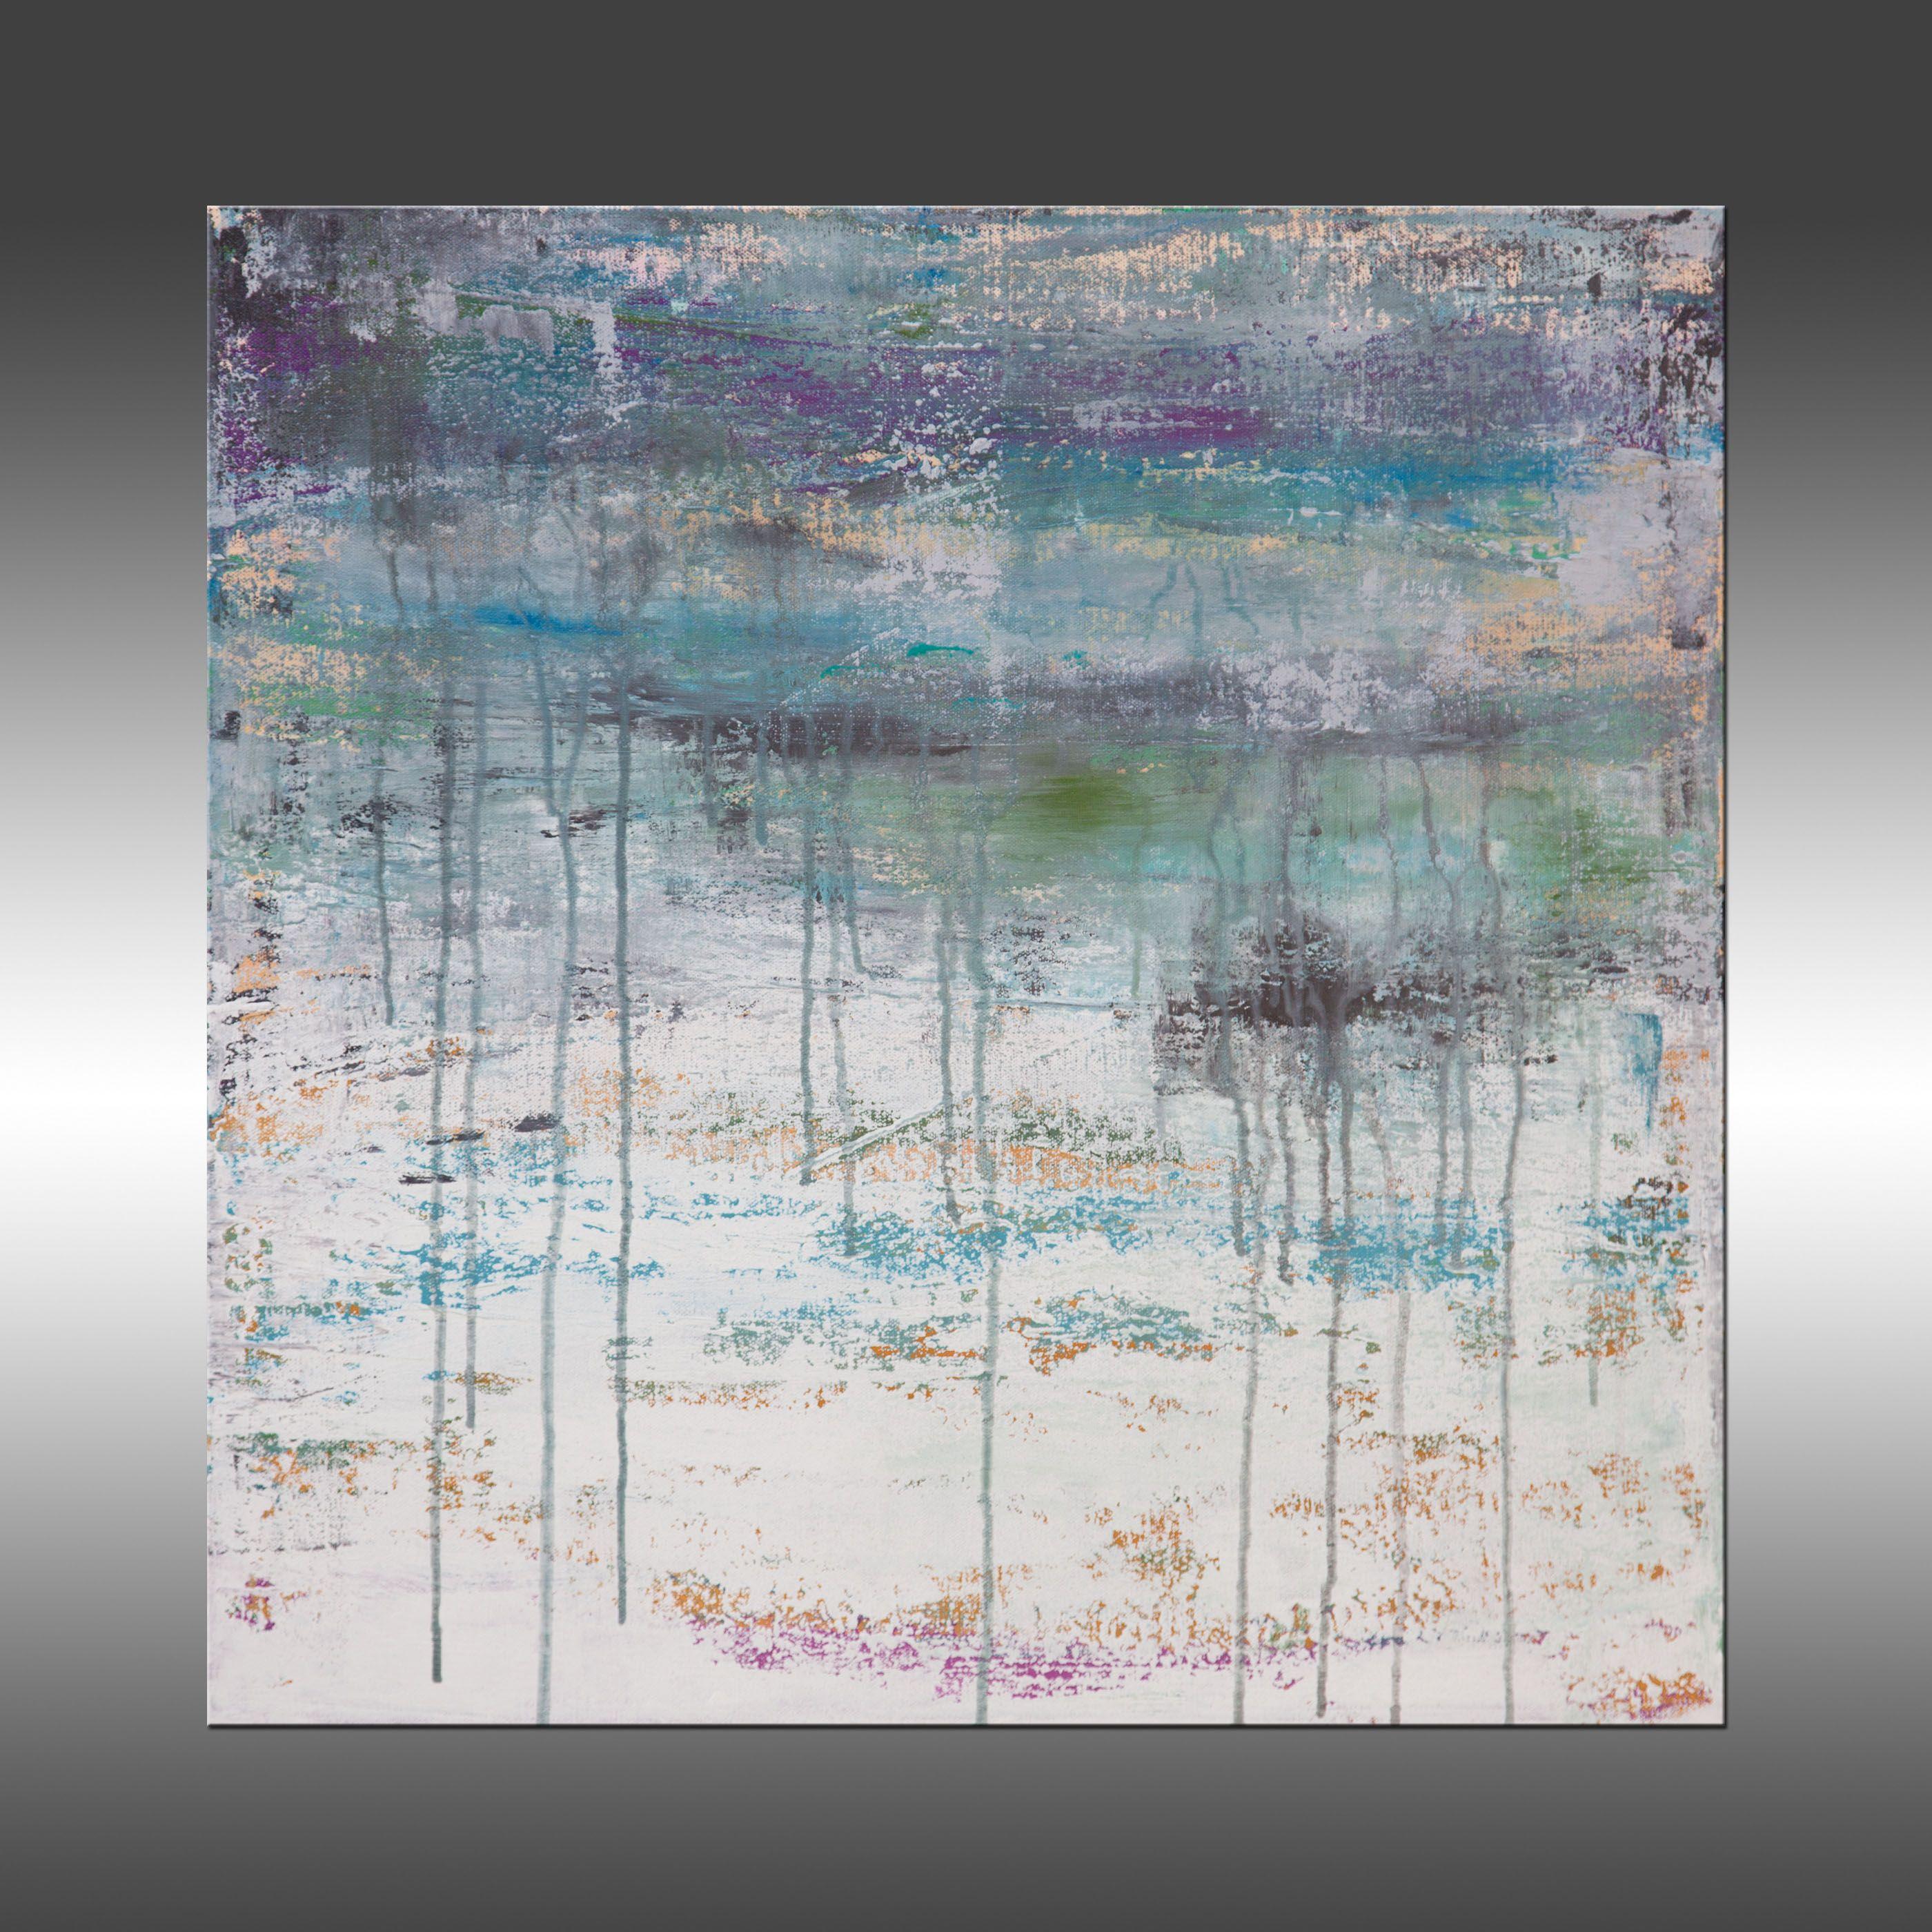 Lithosphere 197 is an original painting, created with acrylic paint on gallery-wrapped canvas. It has a width of 24 inches and a height of 24 inches with a depth of 1 inch (24x24x1).    The colors used in the painting are white, teal, golden yellow,